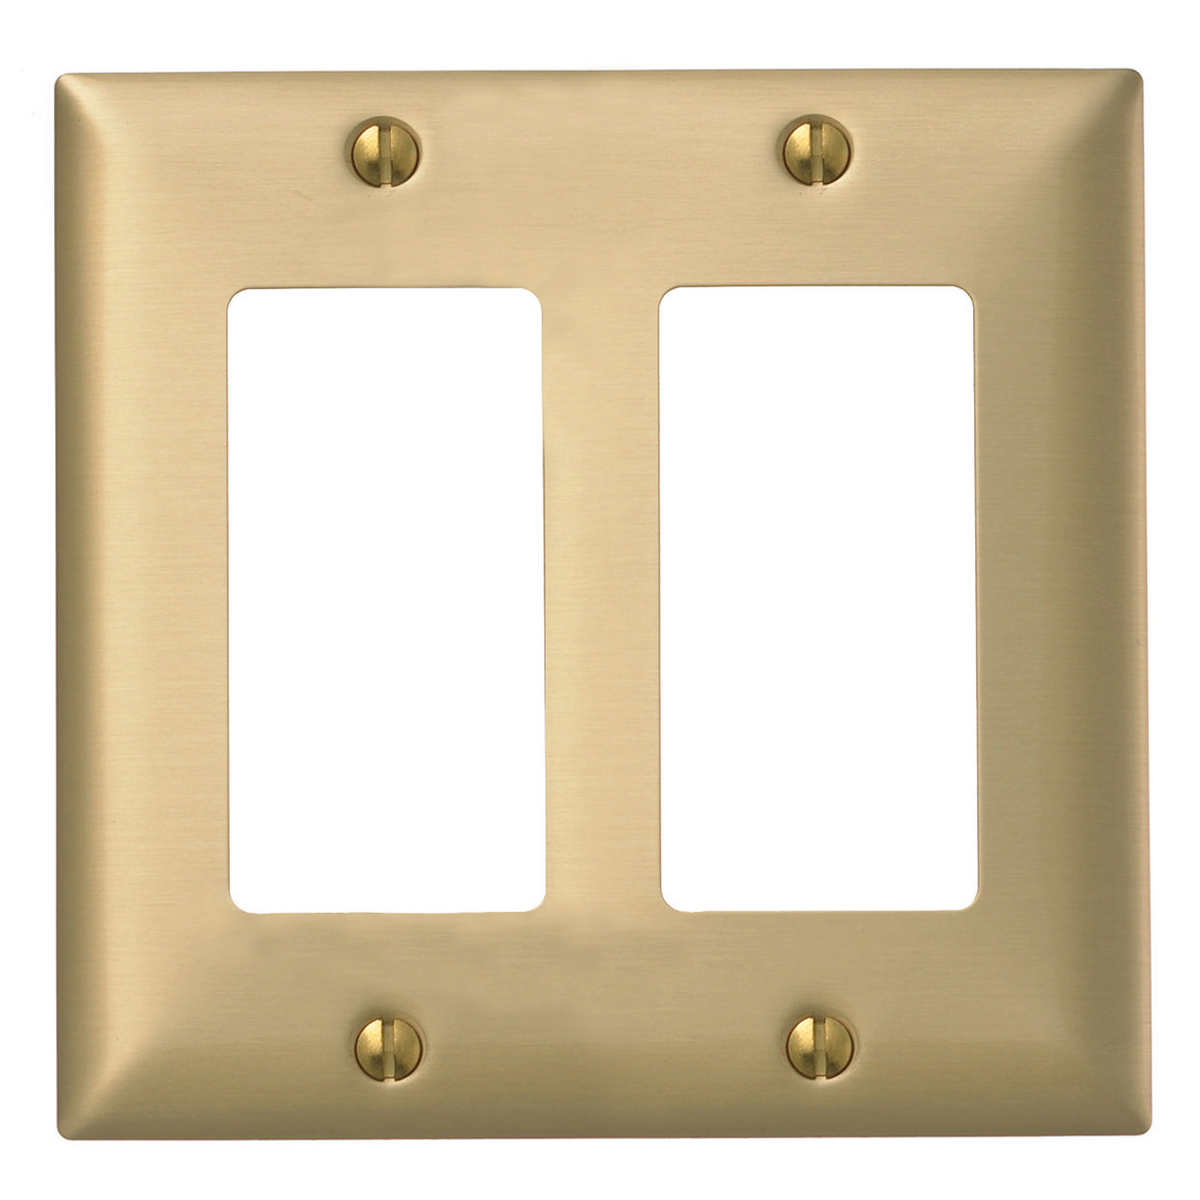 WALLPLATE 2-G, 2) STYLE OPENING, BRS